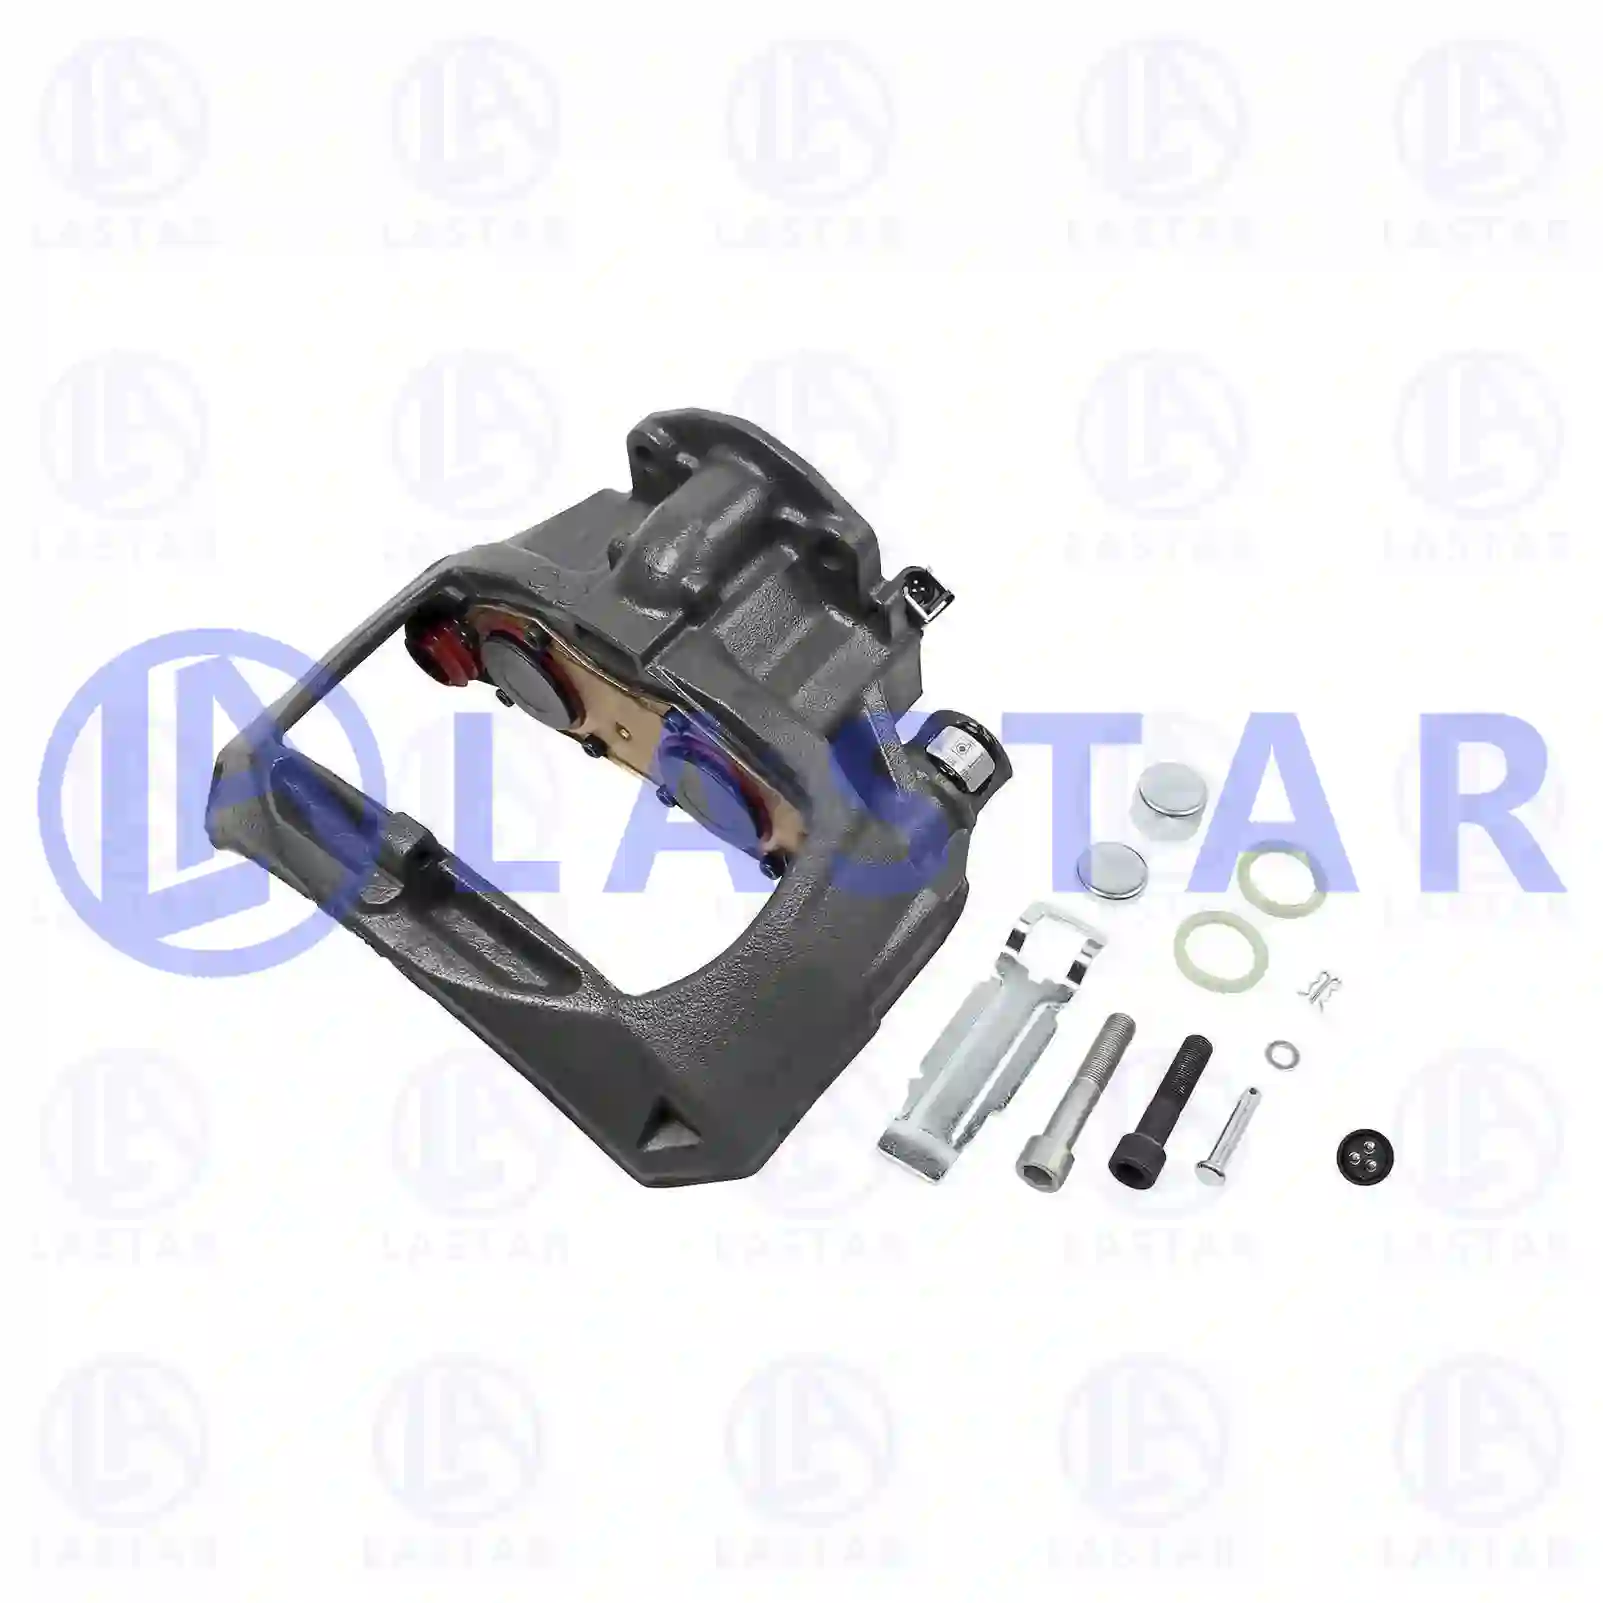 Brake caliper, reman. / without old core, 77716438, 1928820, 573023 ||  77716438 Lastar Spare Part | Truck Spare Parts, Auotomotive Spare Parts Brake caliper, reman. / without old core, 77716438, 1928820, 573023 ||  77716438 Lastar Spare Part | Truck Spare Parts, Auotomotive Spare Parts